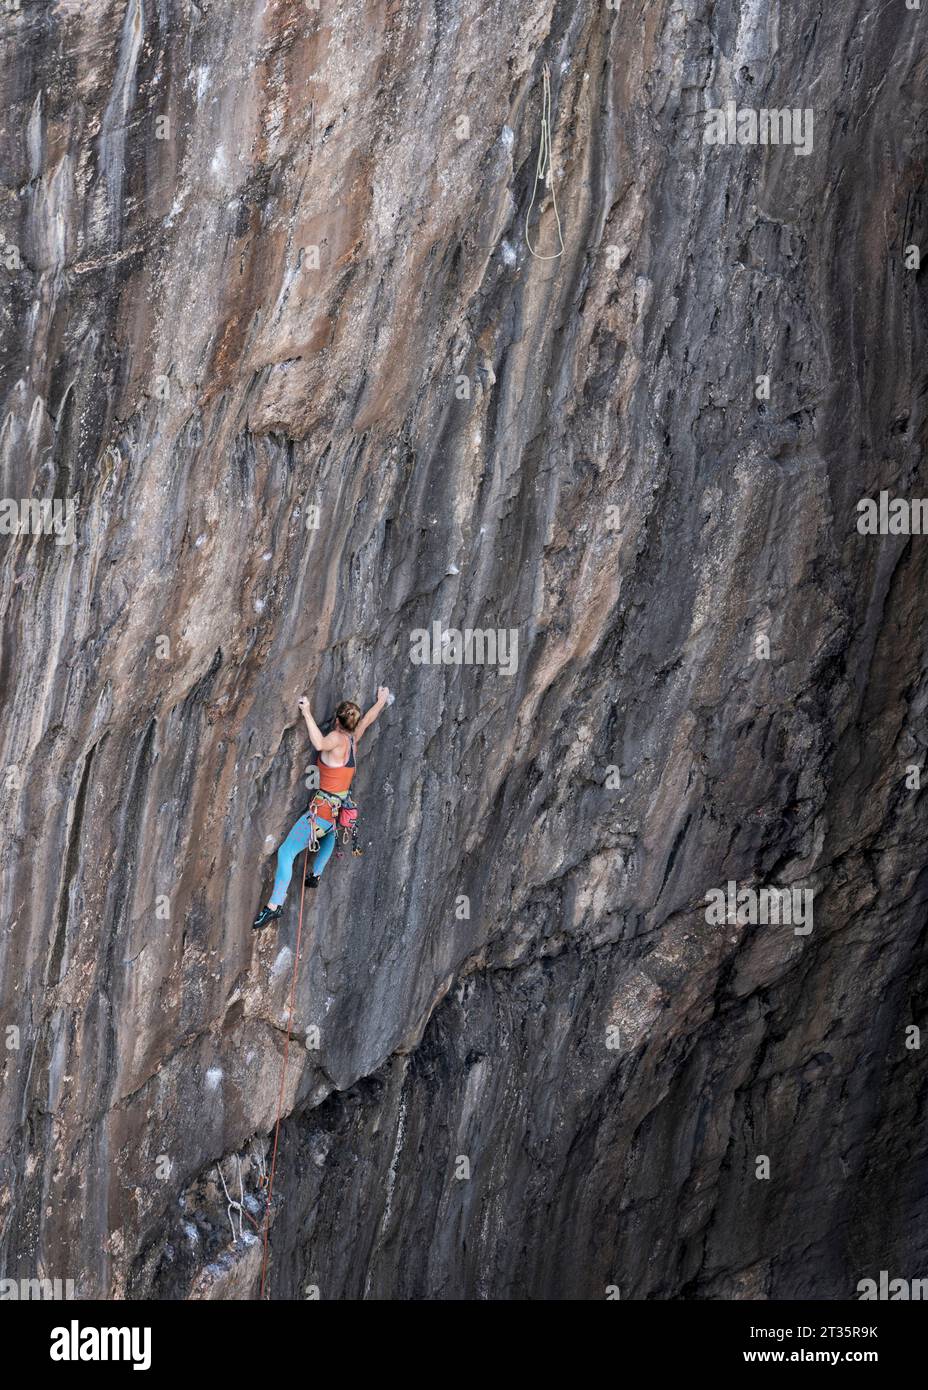 Woman climbing mountain with rope Stock Photo